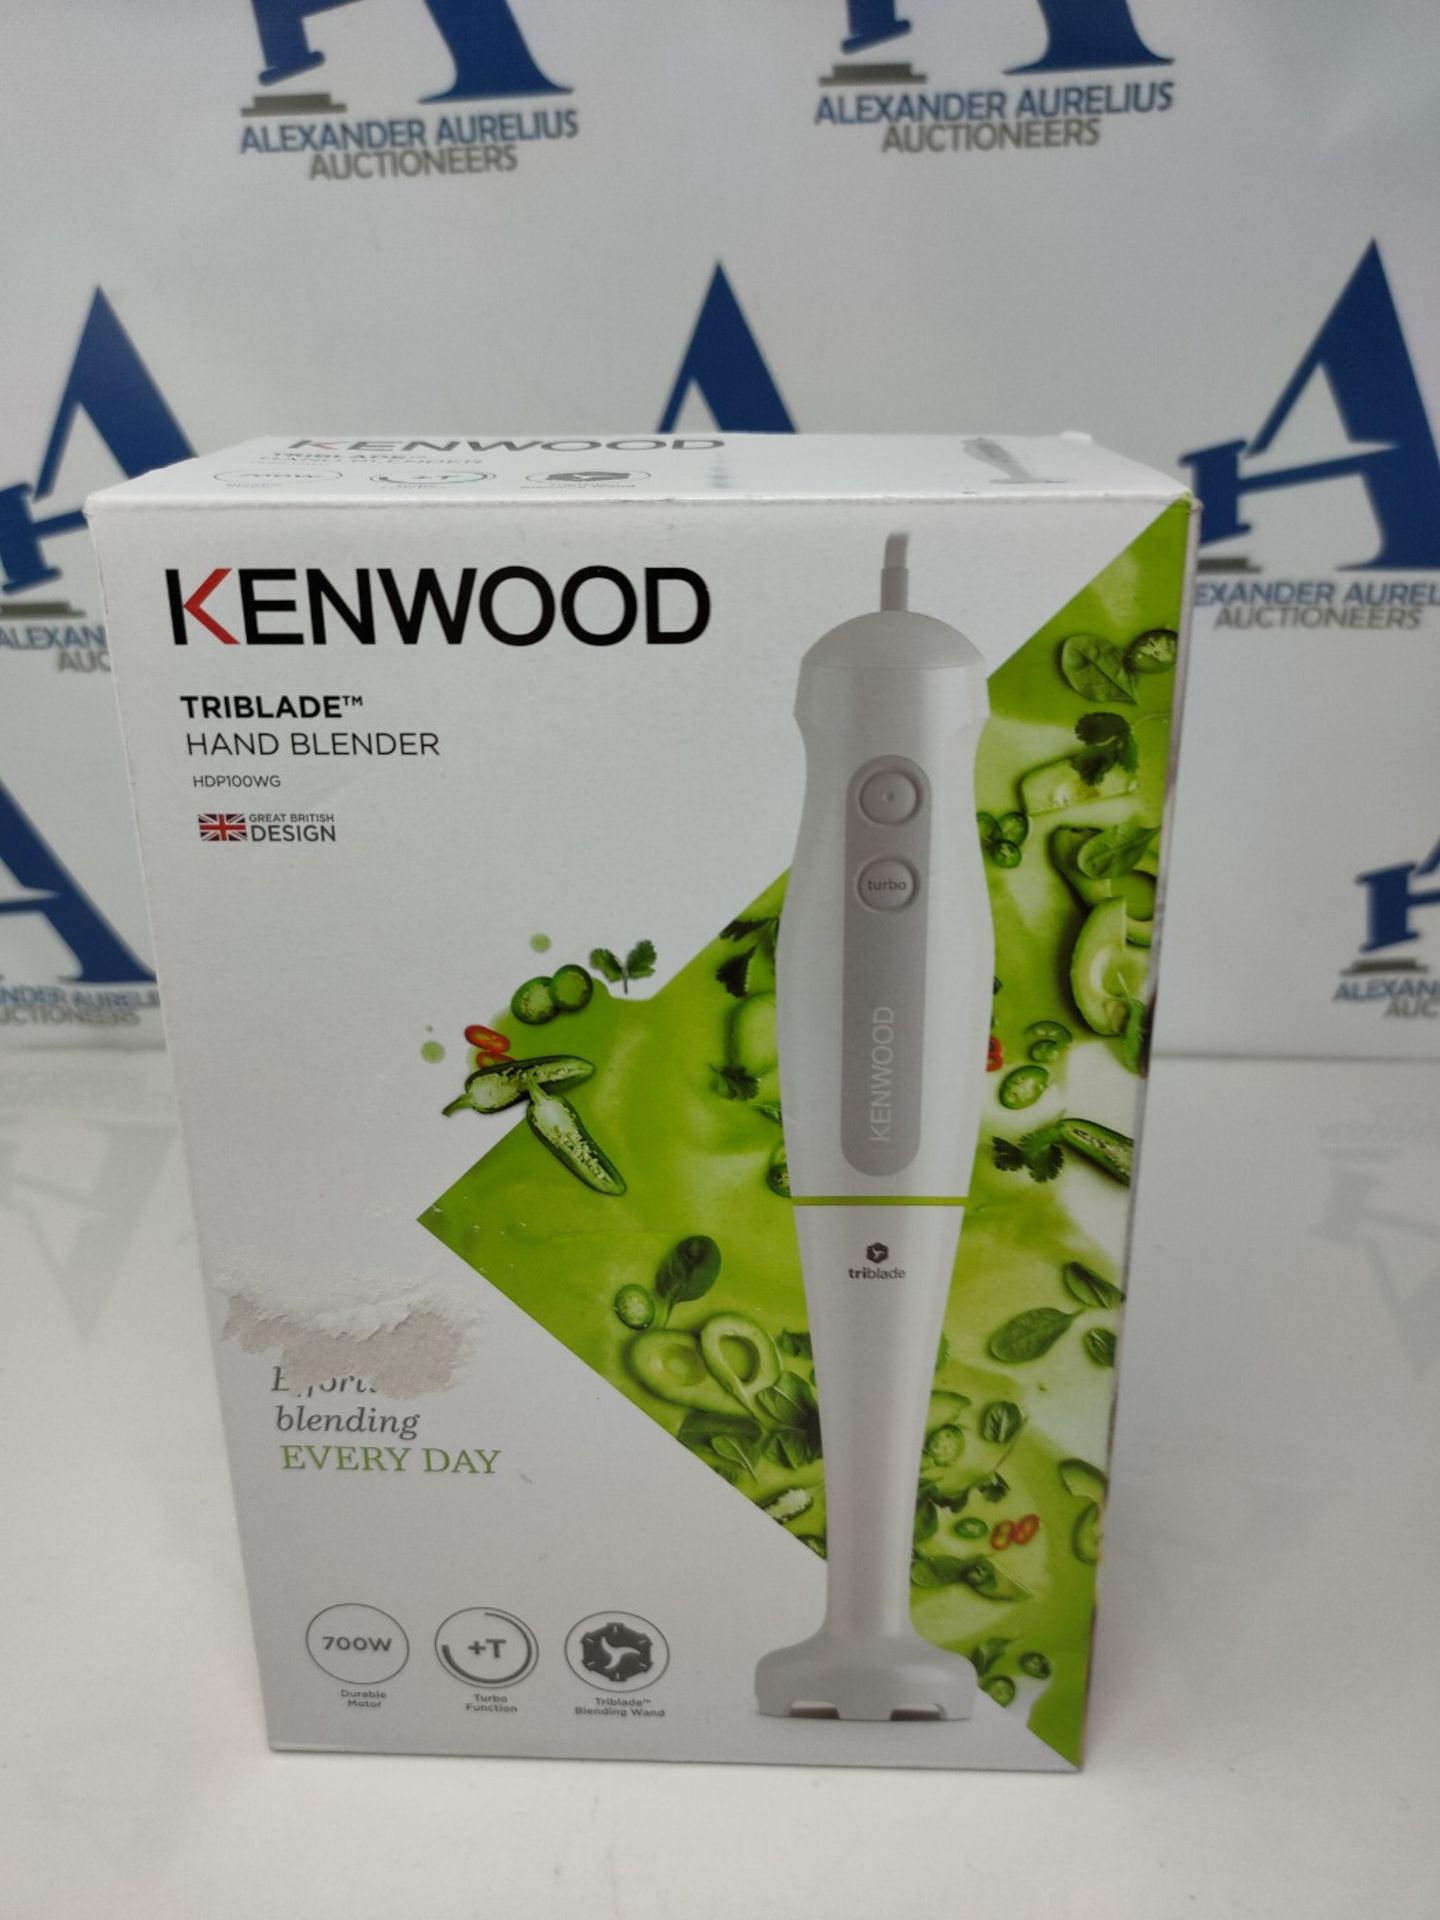 Kenwood Hand Blender, One Speed Mixer with Turbo, Triblend Wand, Anti-splash, 600W, HD - Image 2 of 3